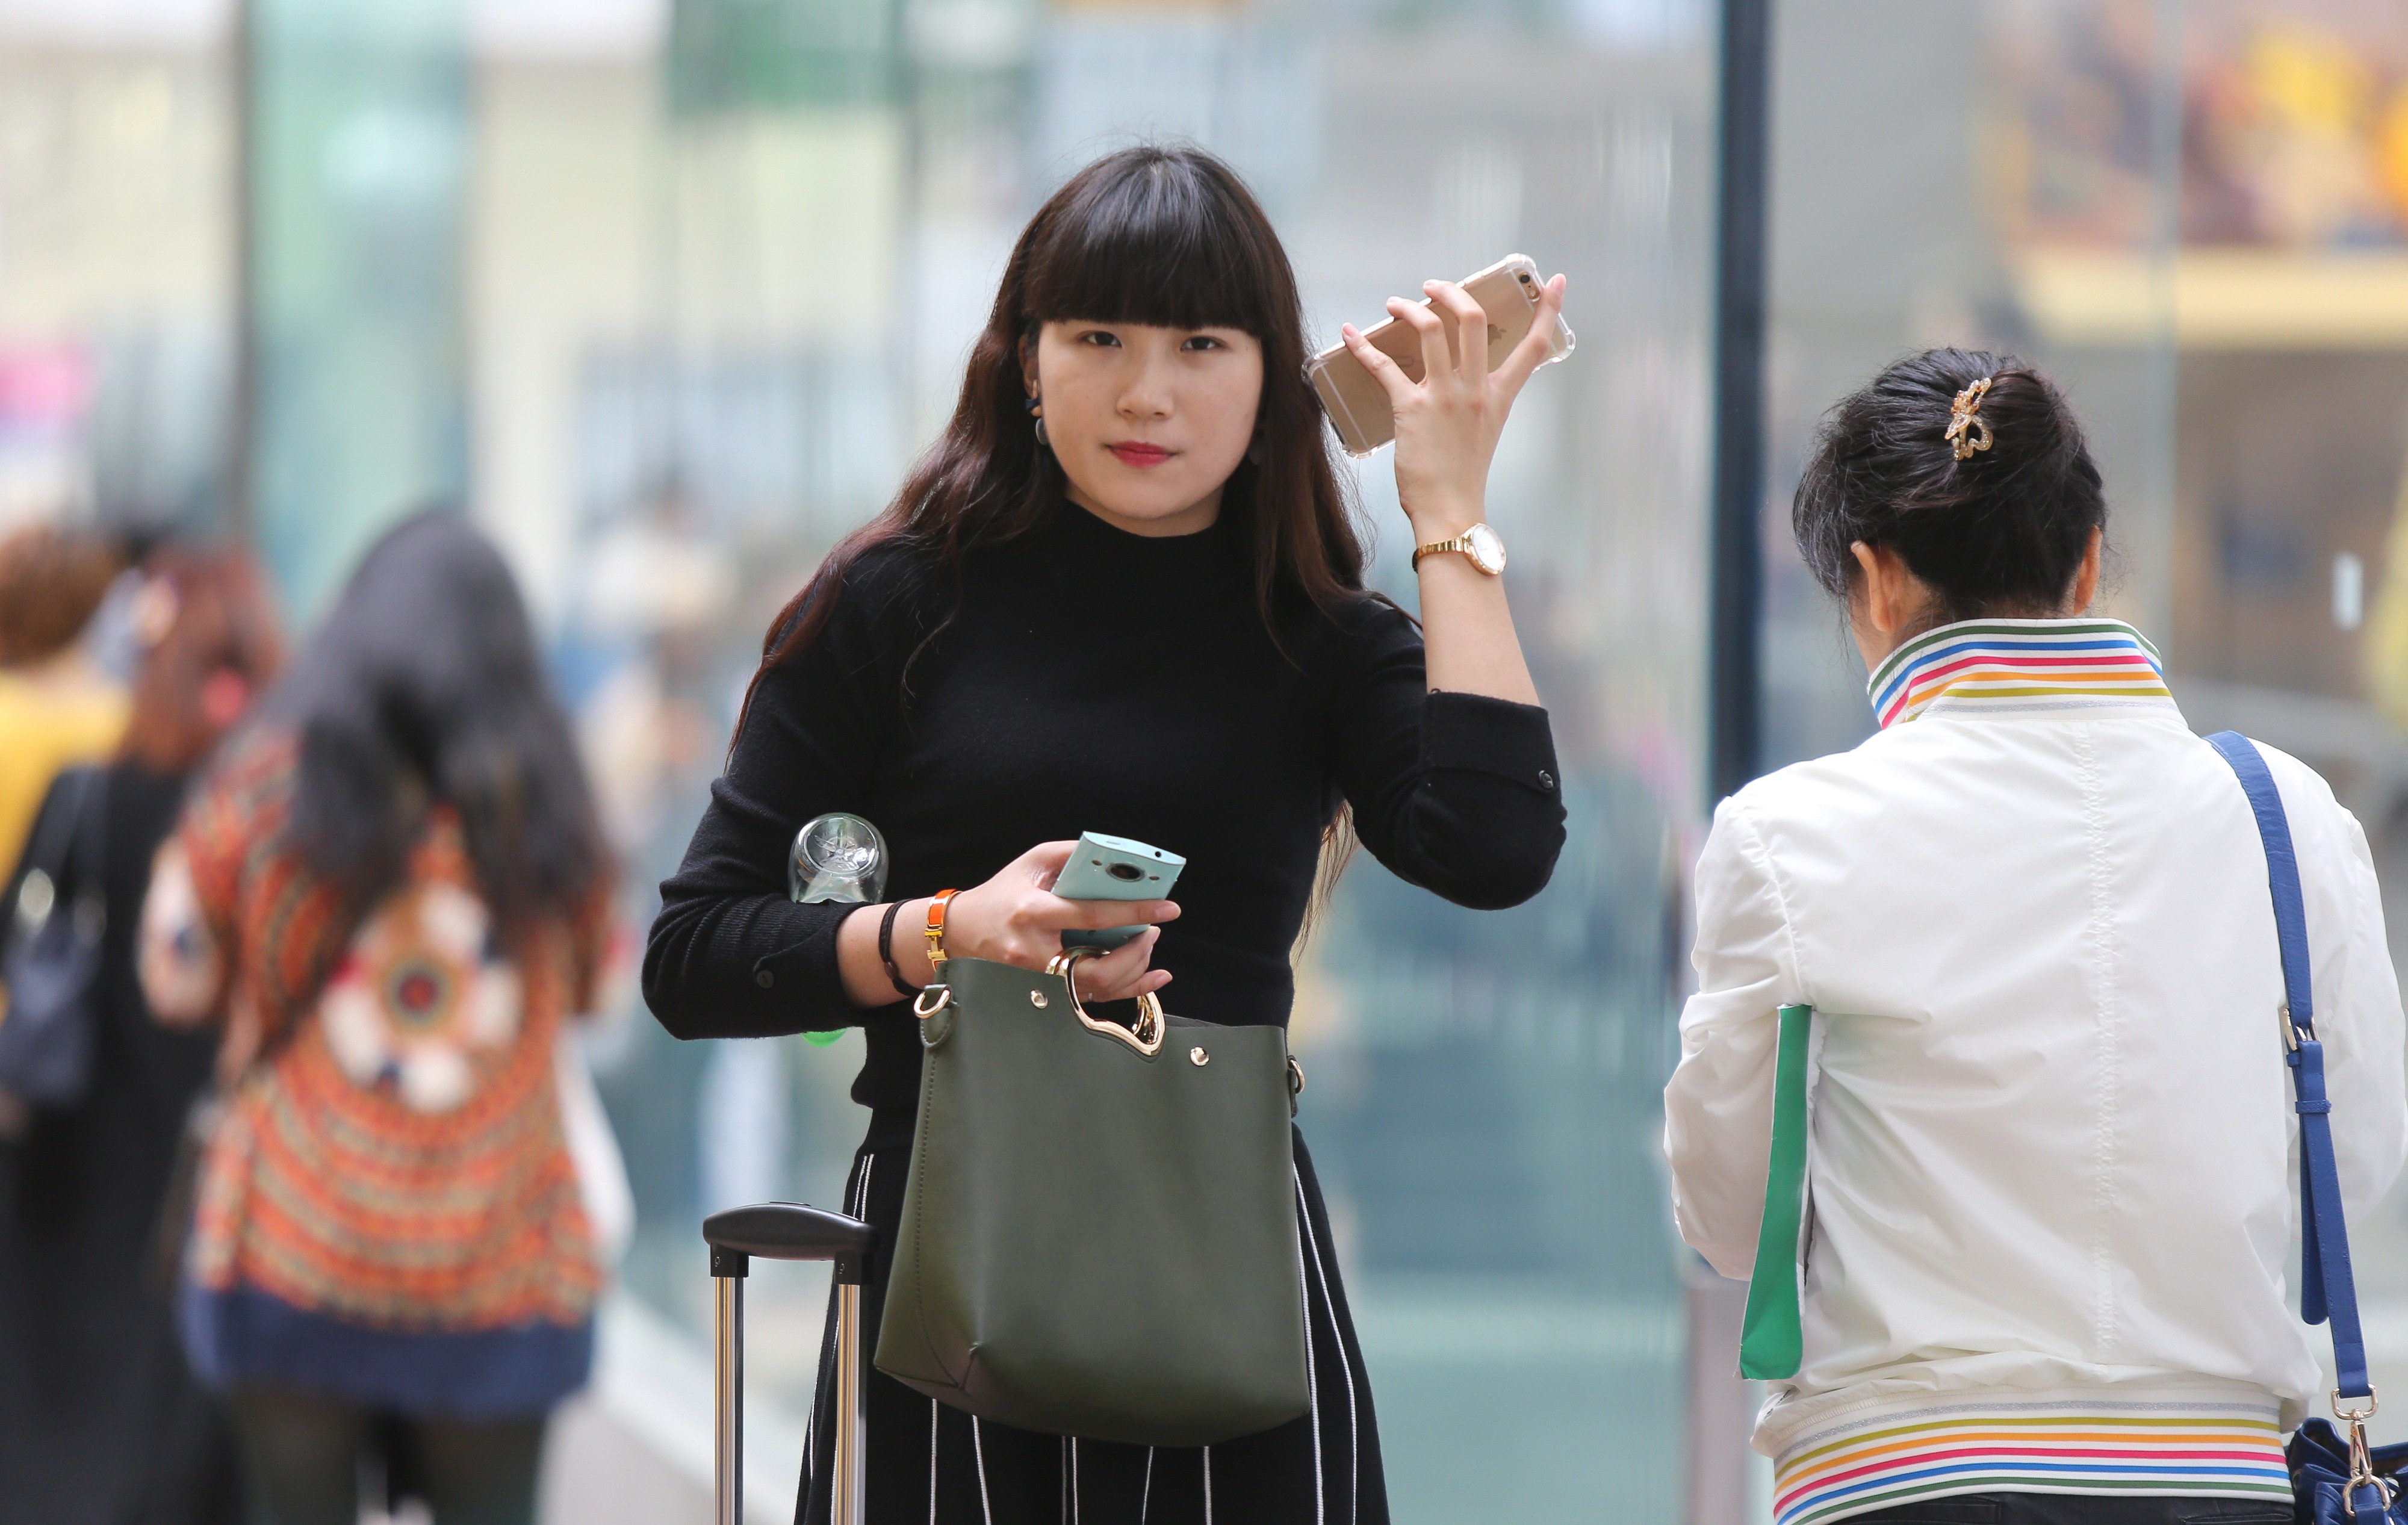 Cold call companies have found ways to work around filtering apps. Photo: Xiaomei Chen